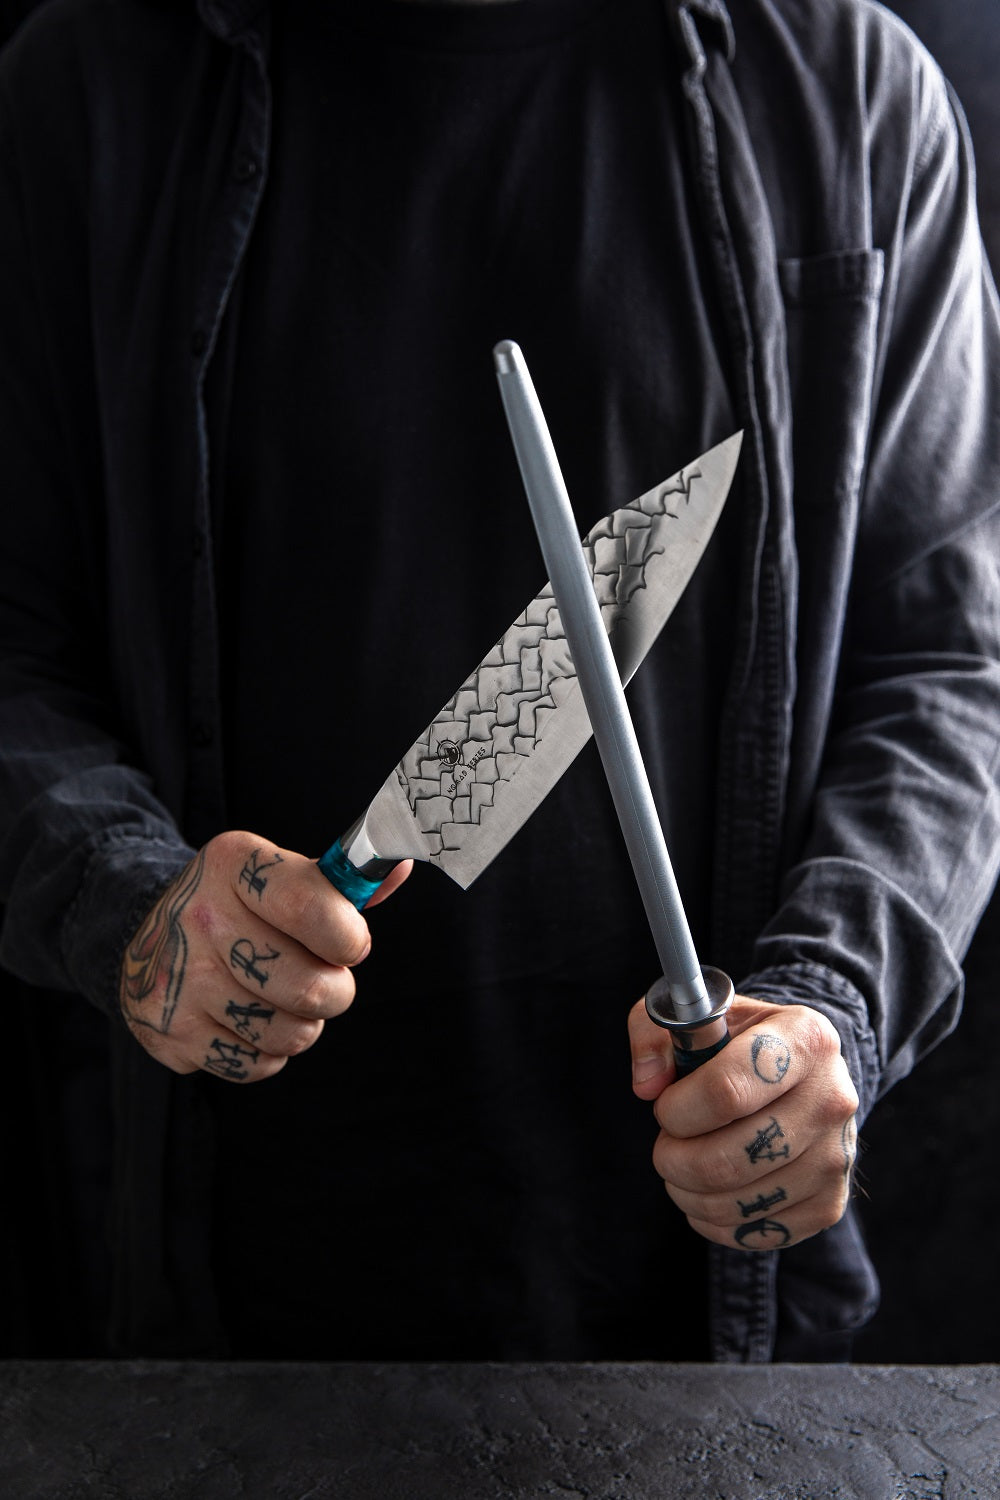 5 Tips for Caring for Your Dad's New Knife